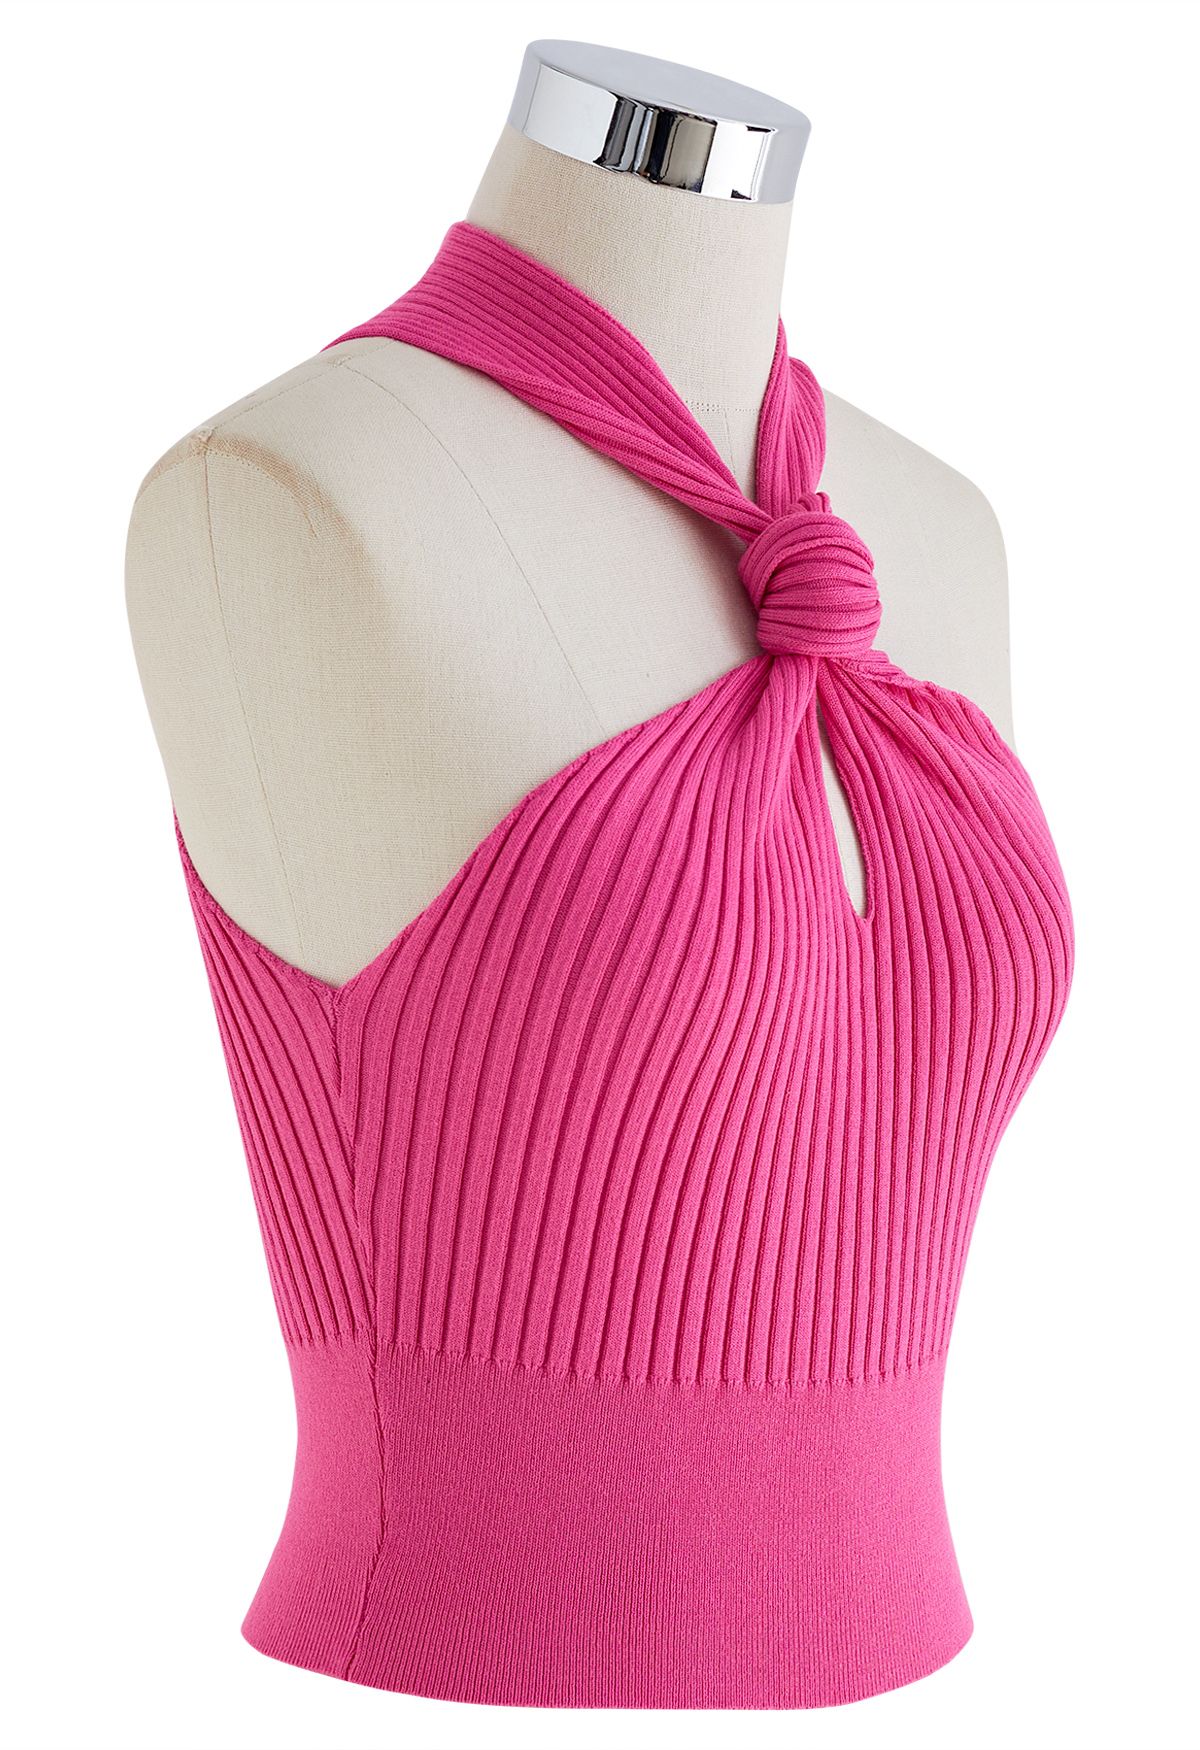 Knot Halter Neck Knit Crop Top in Hot Pink